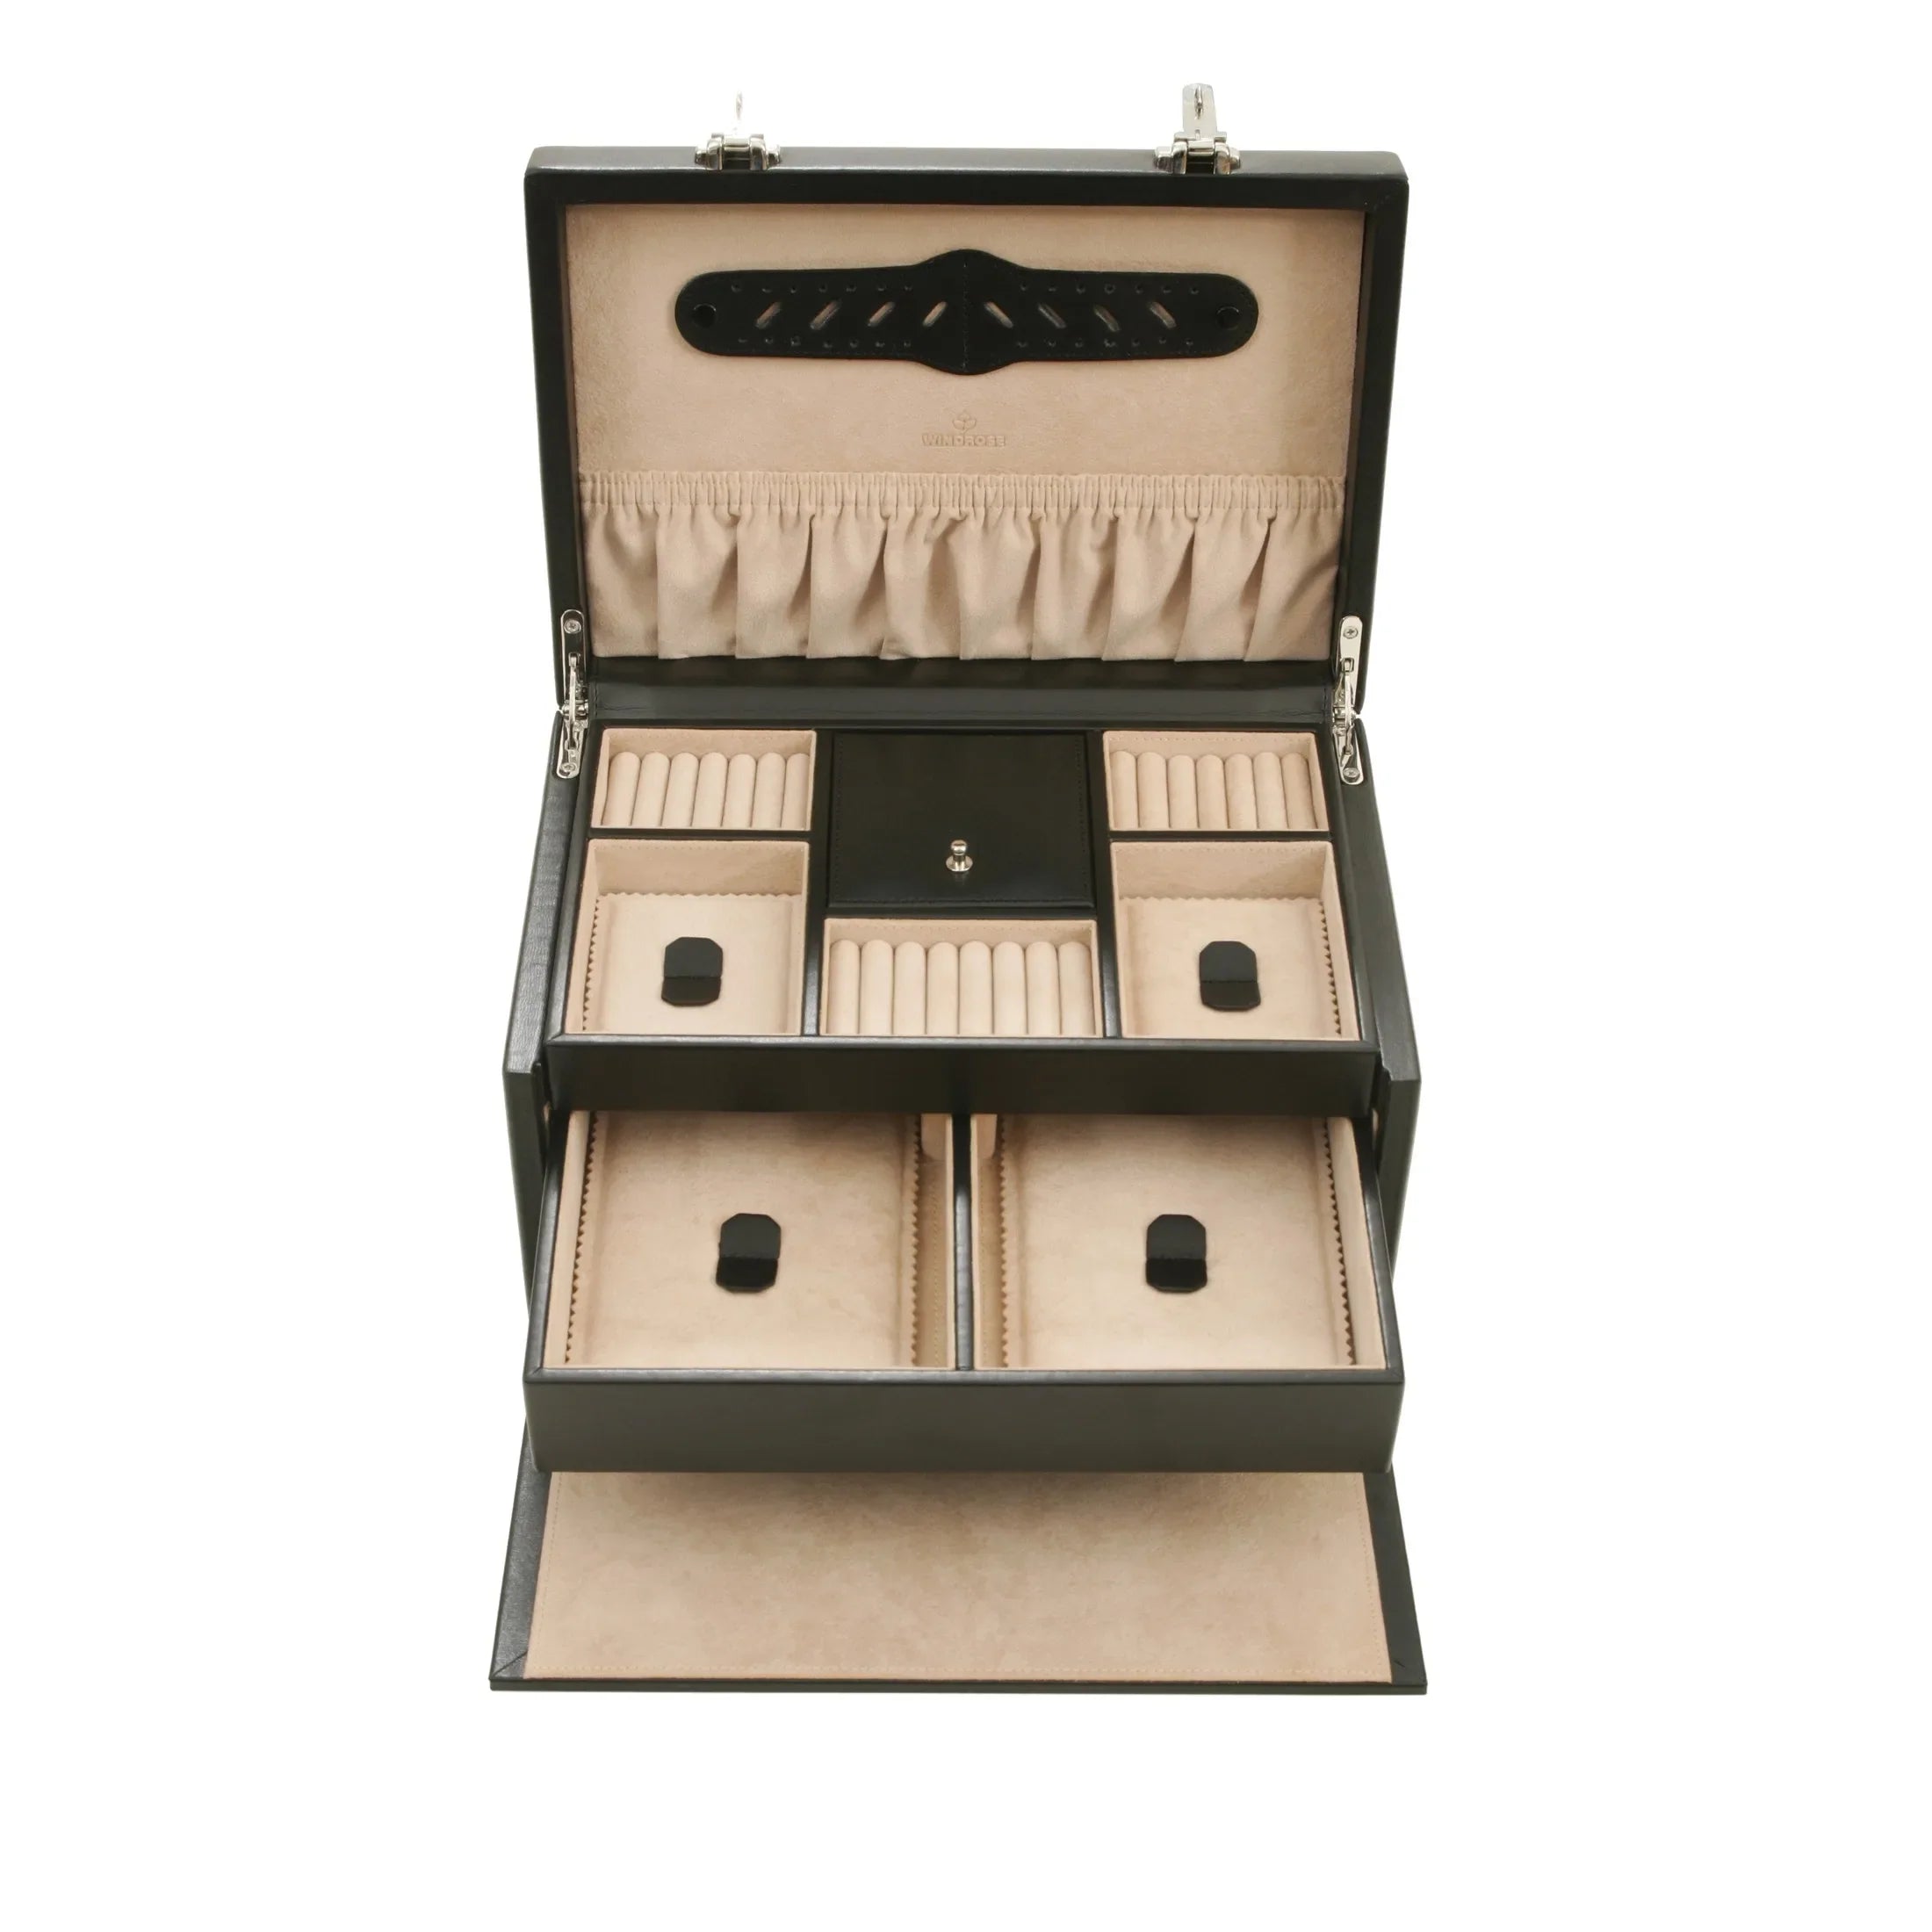 Windrose Ambiance jewelry case / watch case 3 shelves made of leather - black